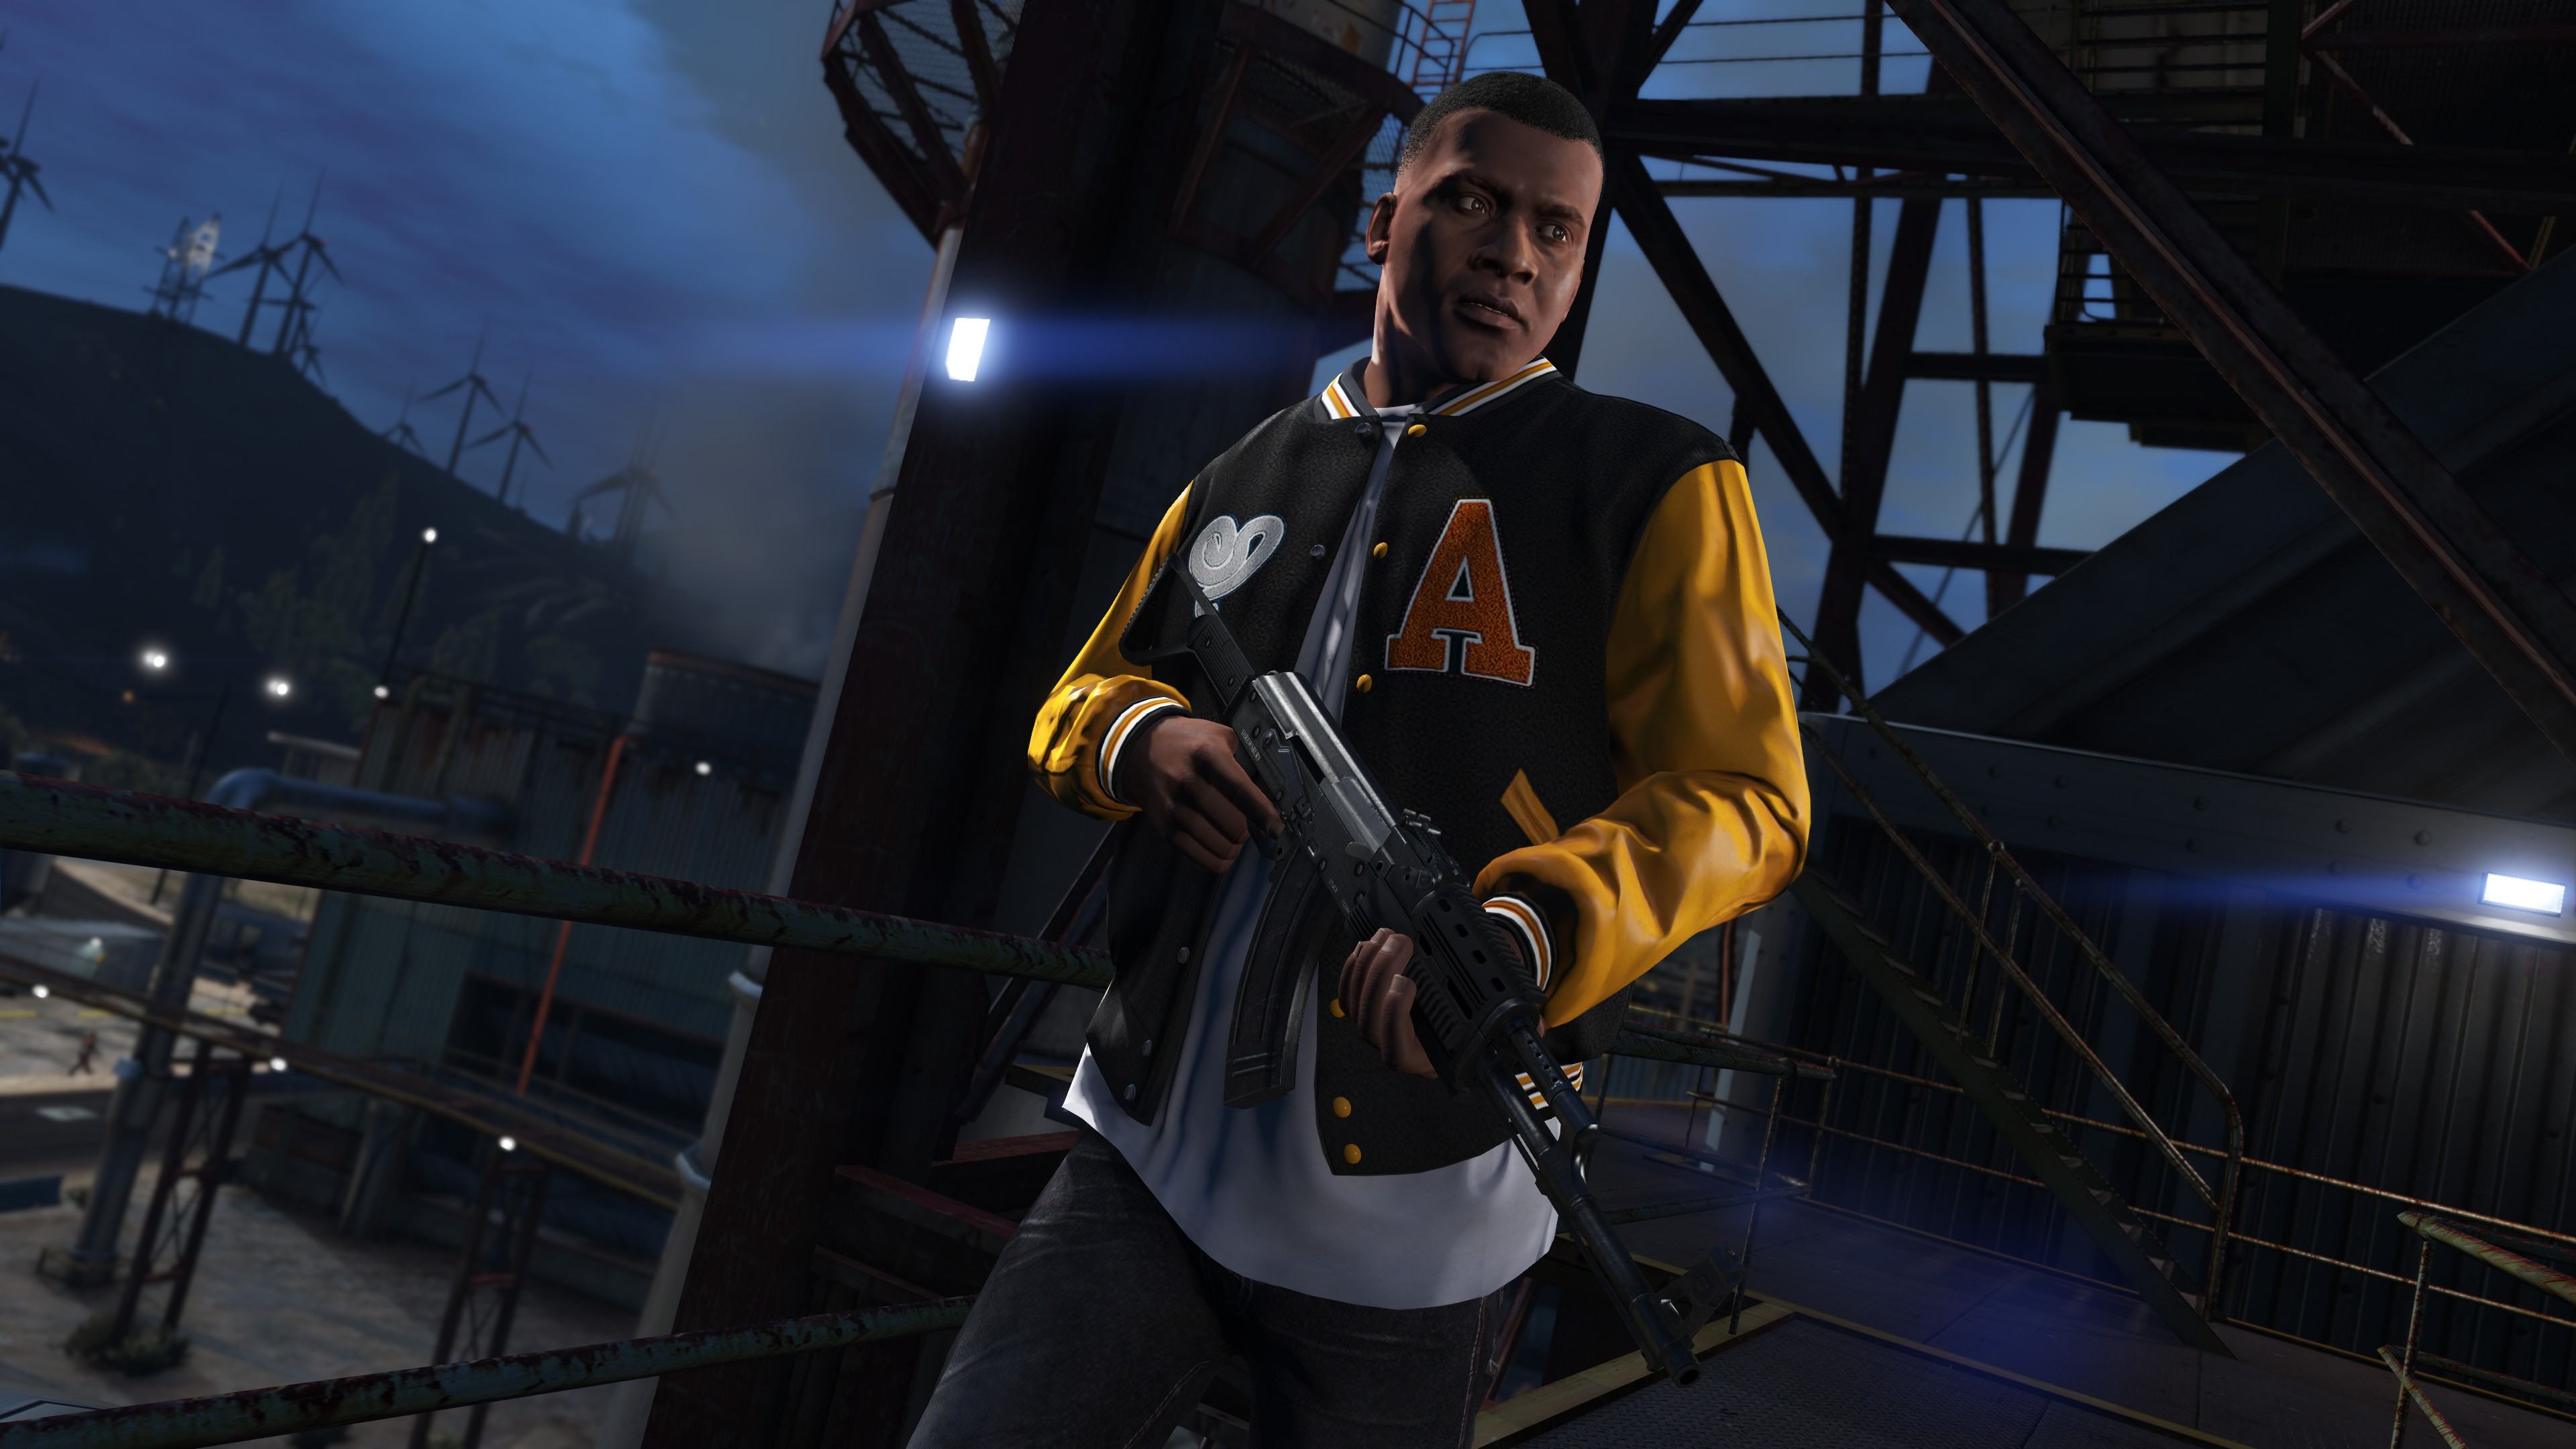 Check Out The Grand Theft Auto 5 PC 60fps Gameplay Video In All Its Glory 477442 2 